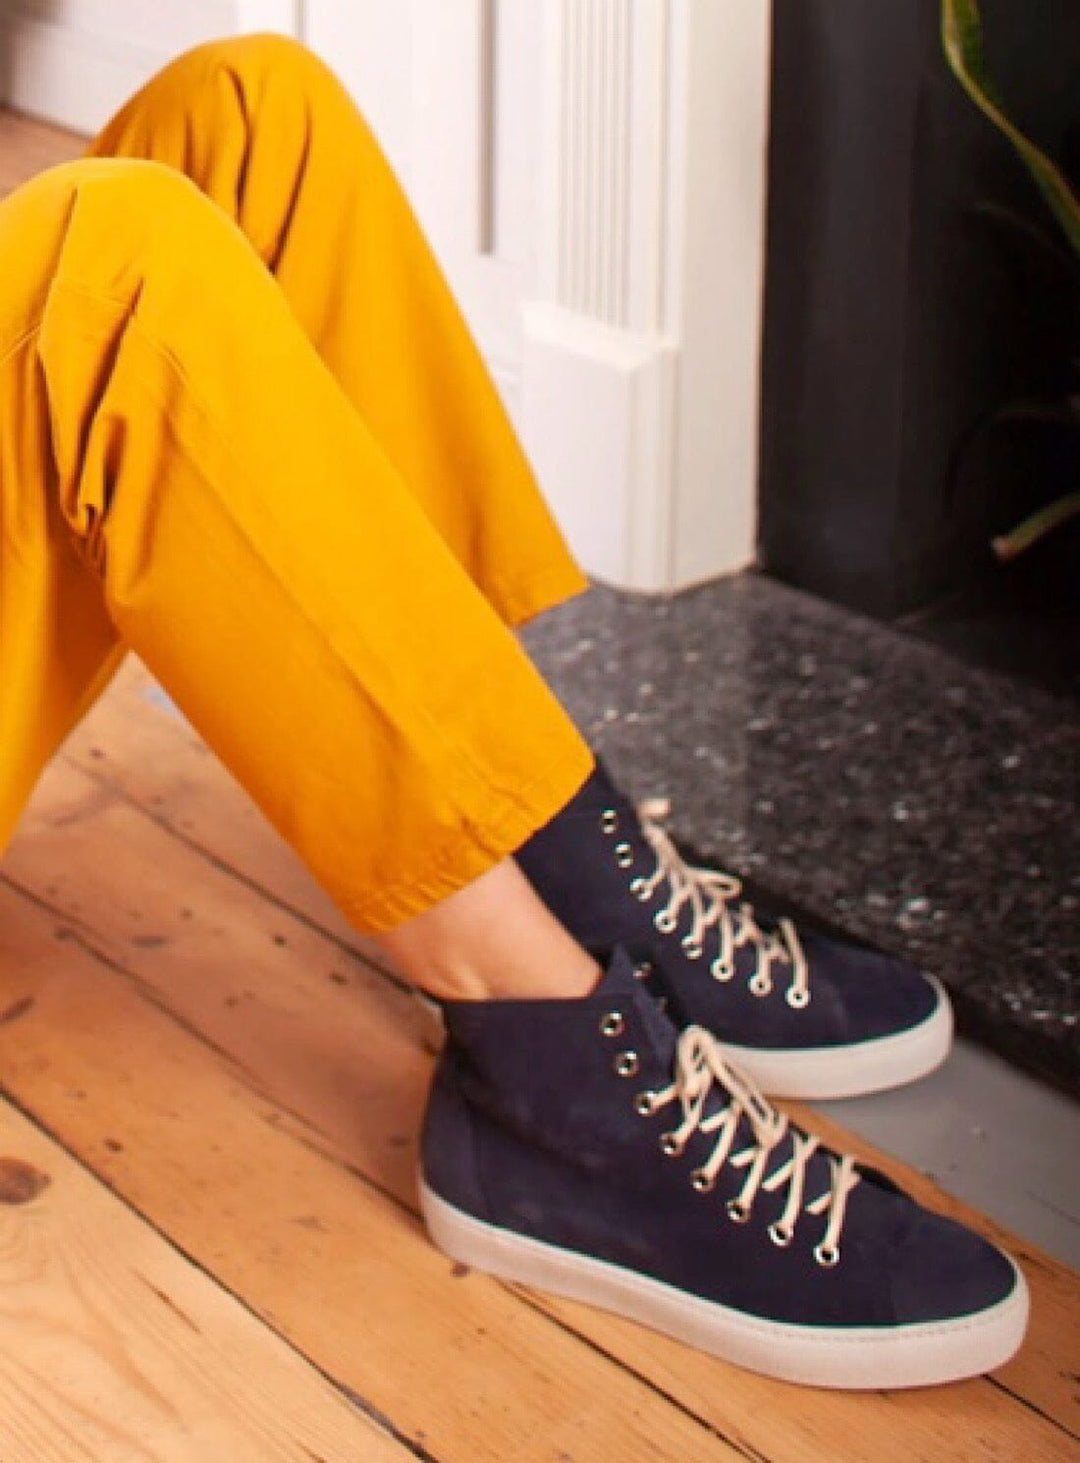 Nubuck High Top Trainers in Navy Shoes YBDFinds 